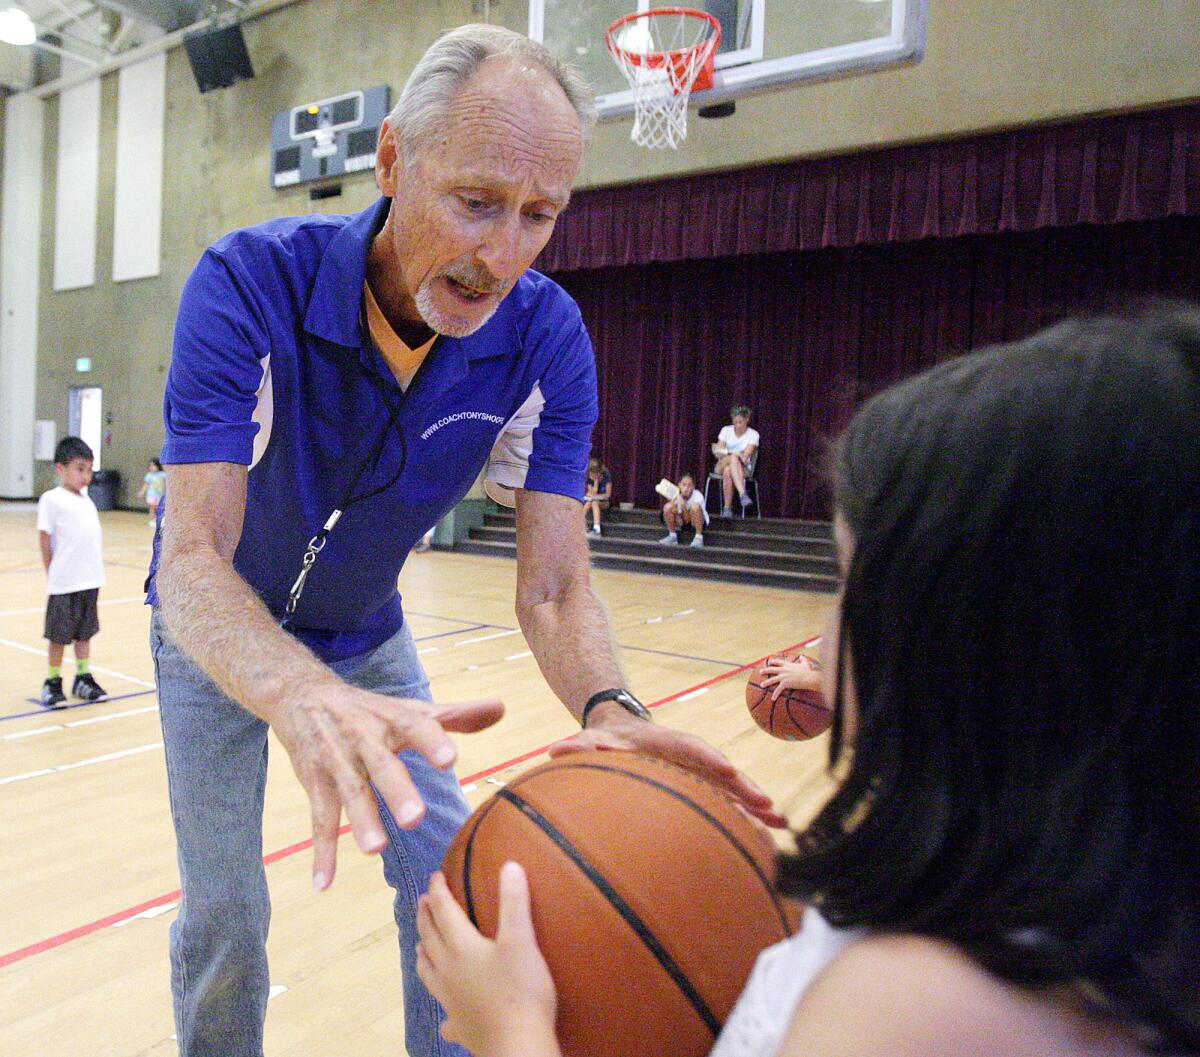 Camp director Tony Passarella goes from player to player, including Kelin Shajanian, 6, of Glendale, to go over how to properly hold a basketball and make a chest pass at the annual Basketball, Training and Fitness Camp at Pacific Park Community Center in Glendale on Thursday, July 23, 2015.